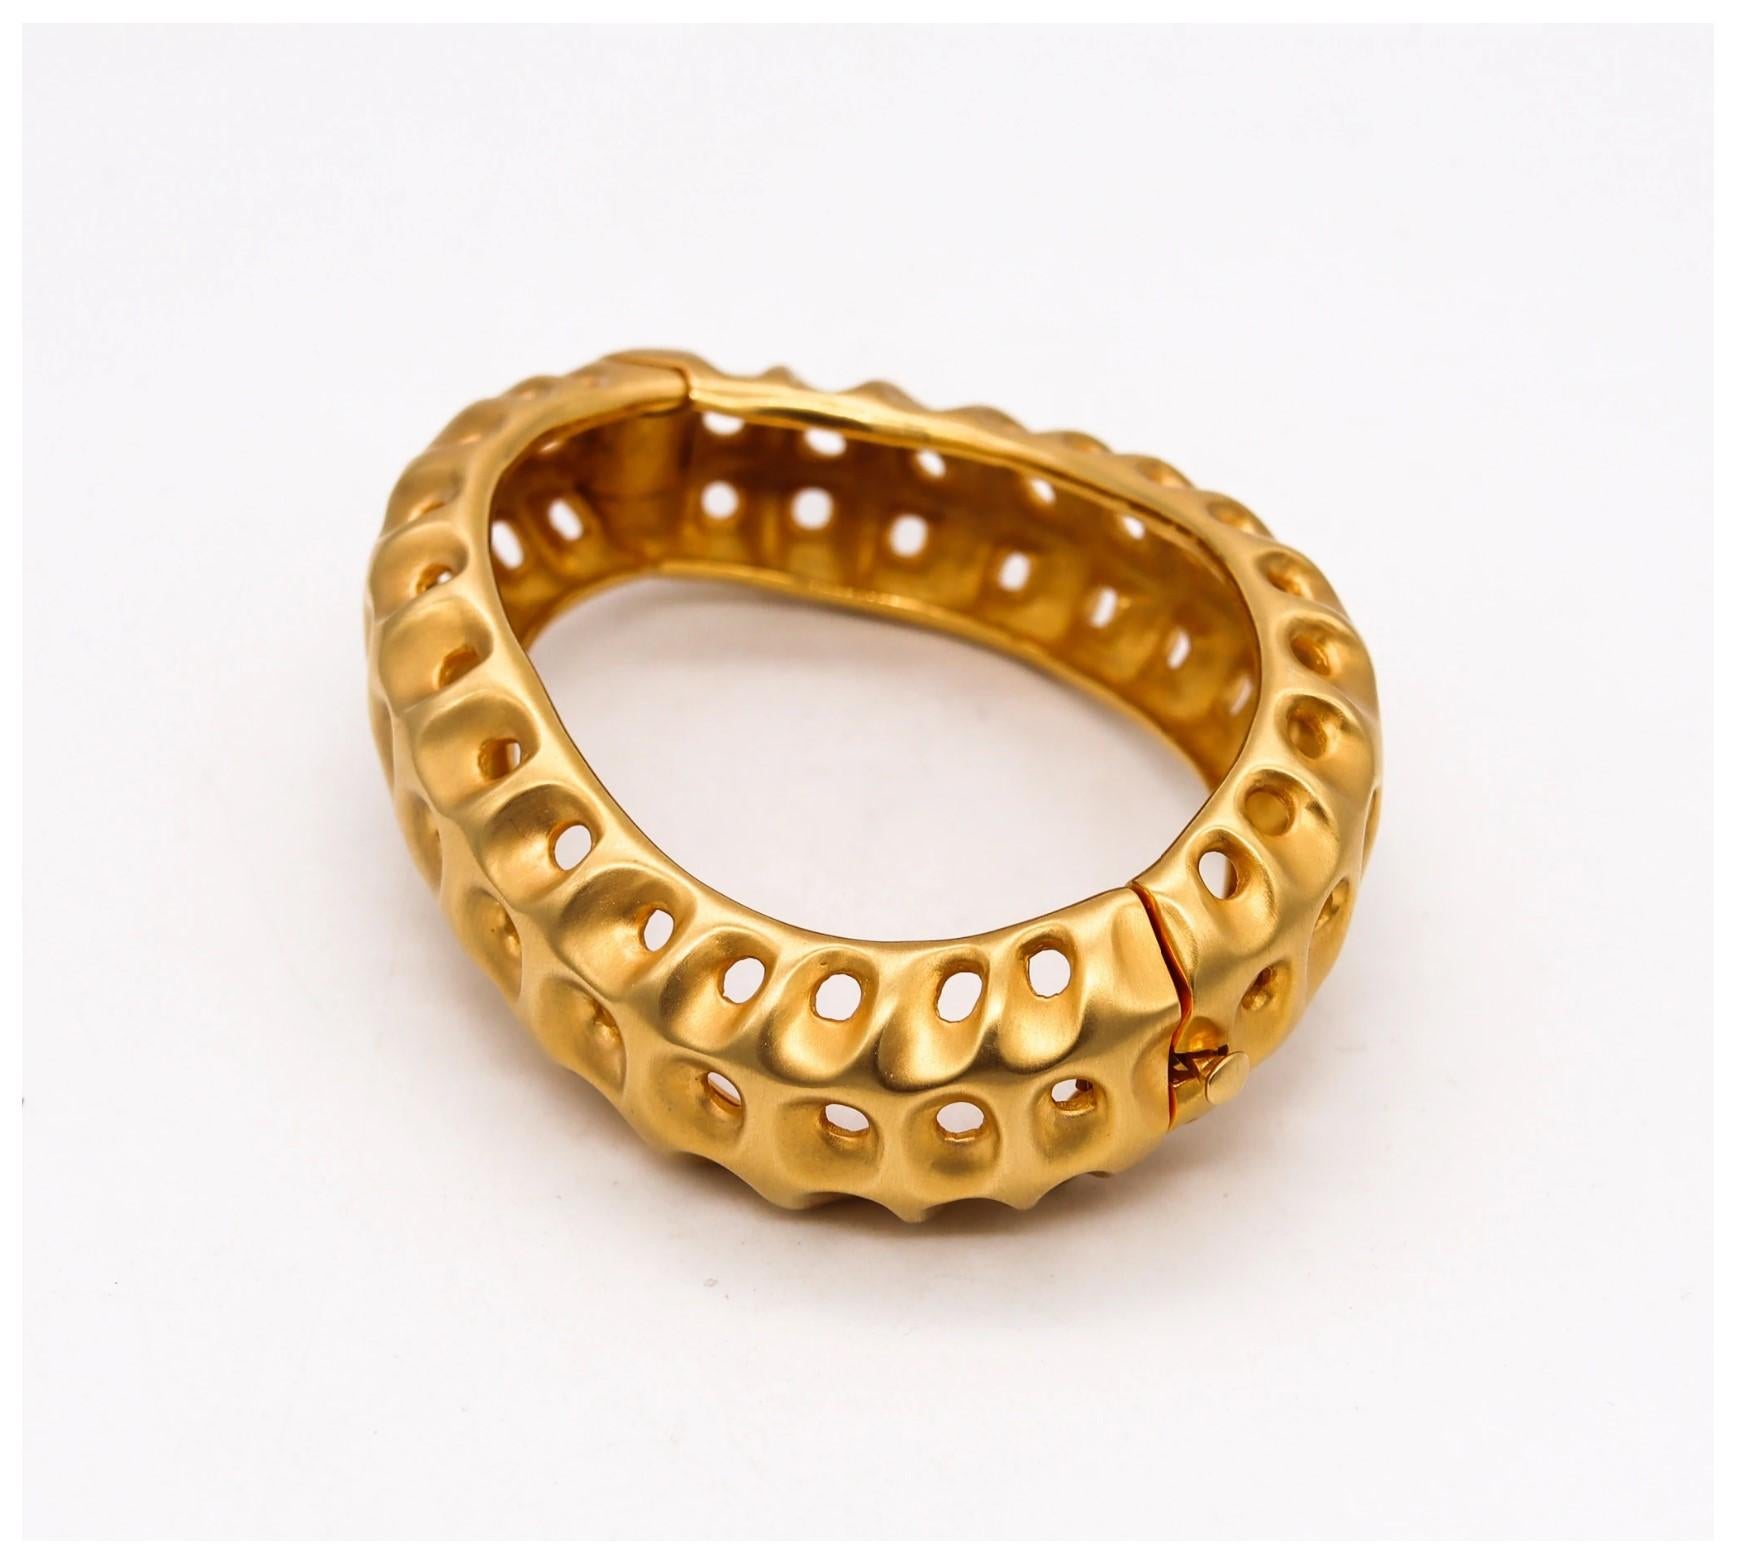 Angela Cummings Studios 1987 New York Rare Honeycombs Bracelet Solid 18Kt Gold In Excellent Condition For Sale In Miami, FL